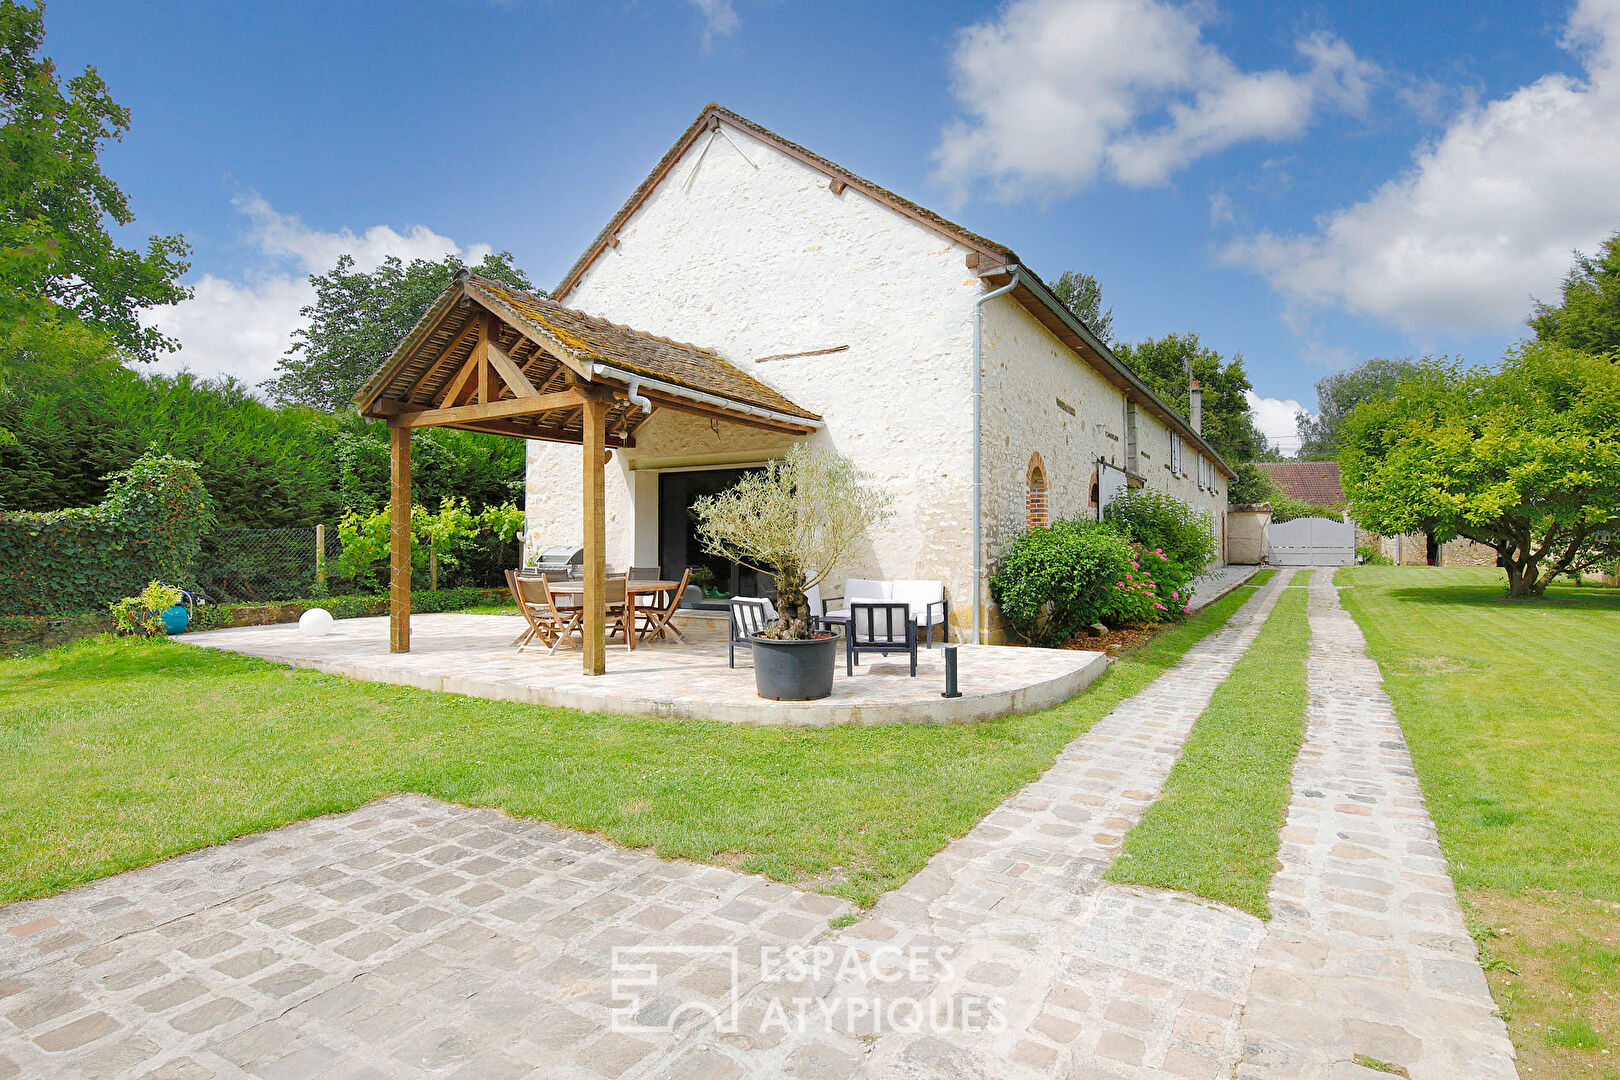 Character house with outbuildings, swimming pool and garden